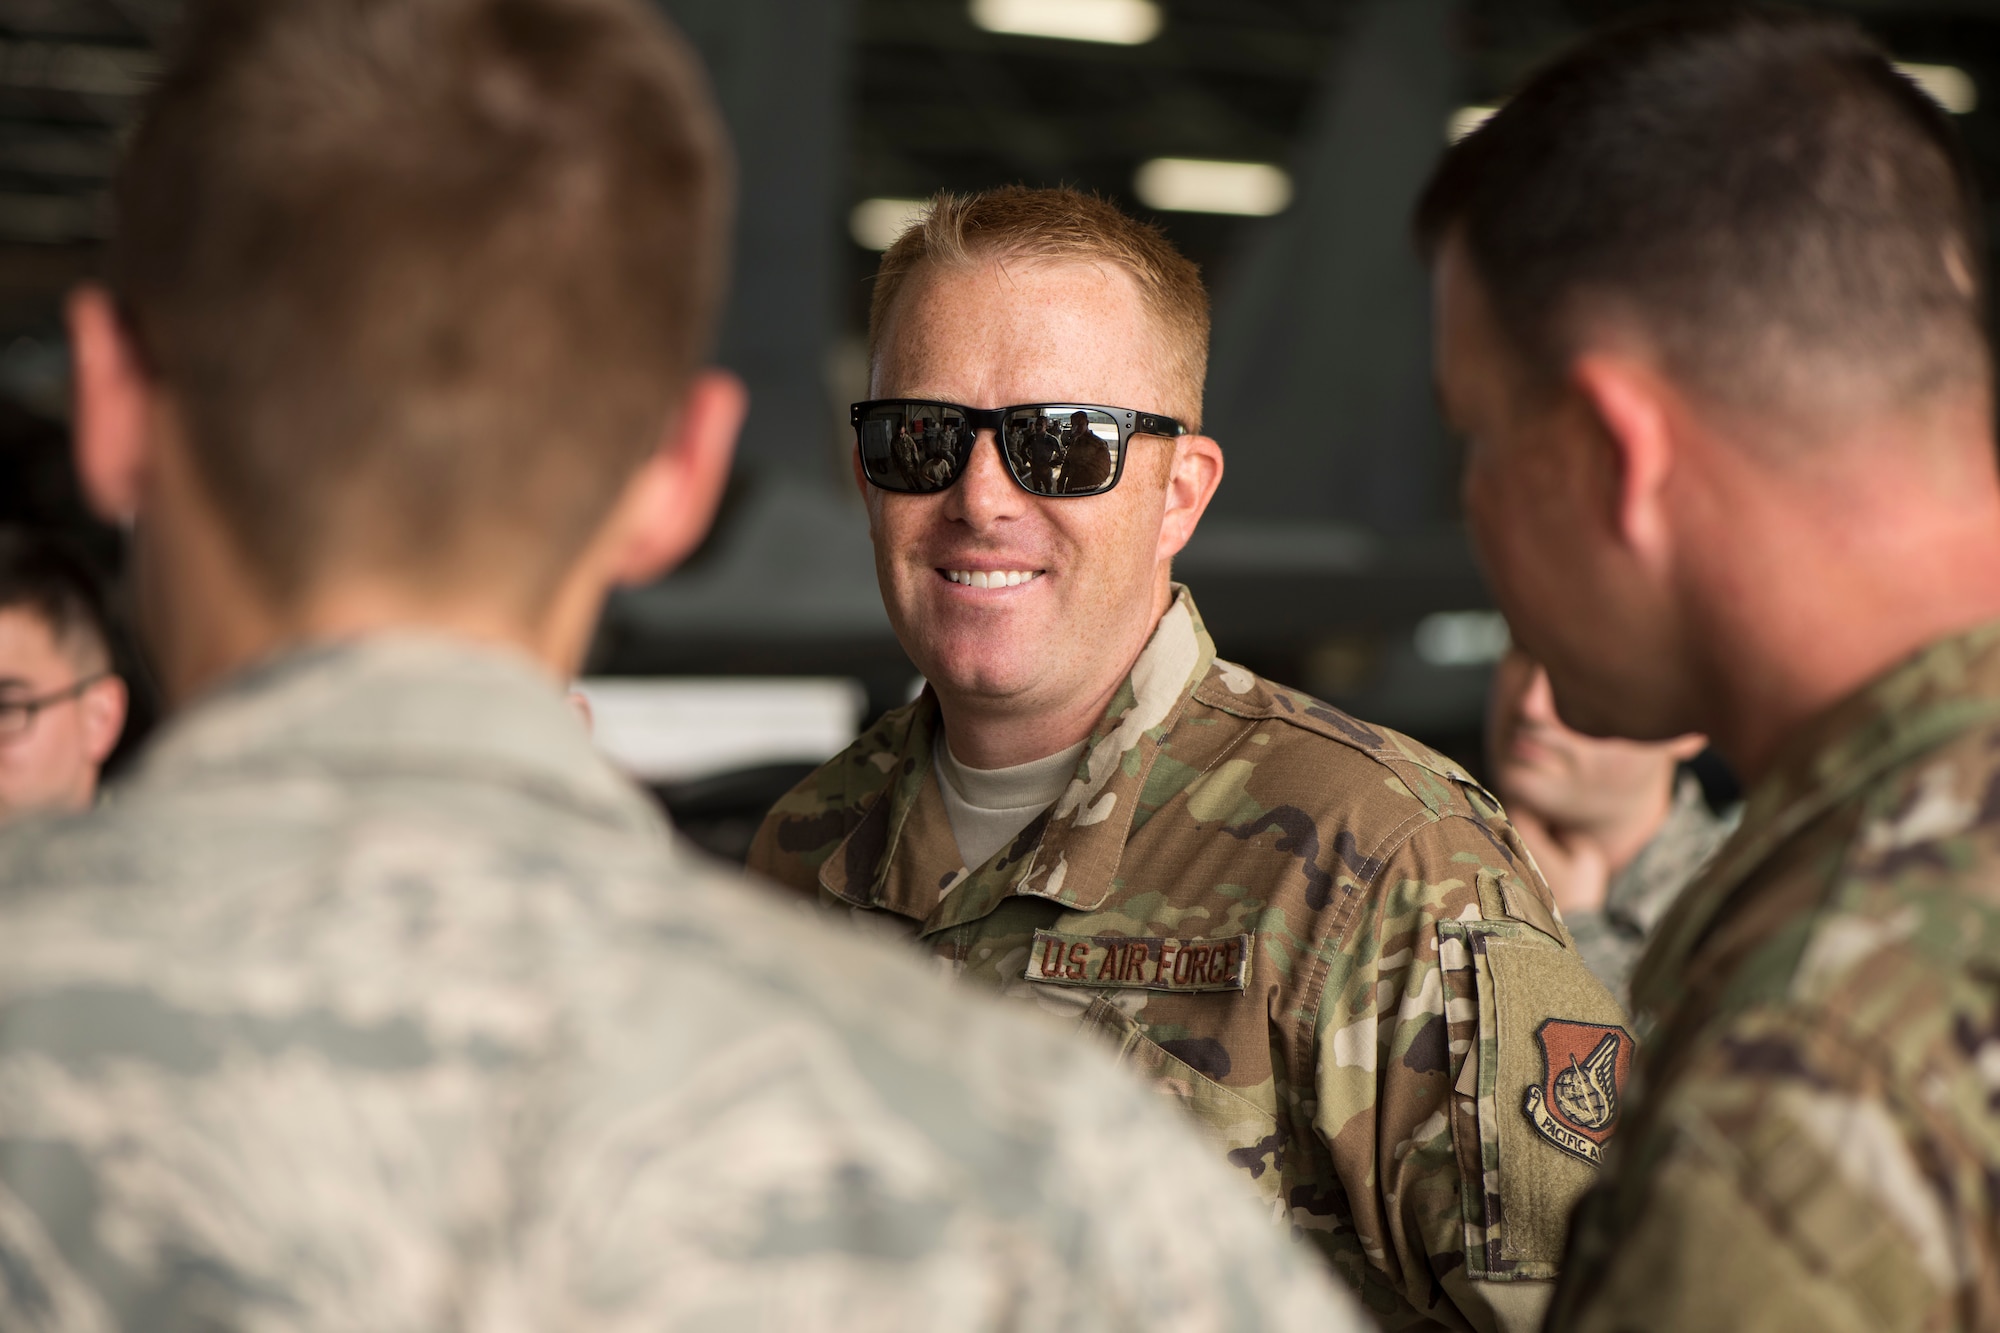 U.S. Air Force Master Sgt. Kyle Dunn, the 13th Aircraft Maintenance Unit F-16 Fighting Falcon production superintendent, smiles while speaking with his fellow Airmen during an aviation training relocation at Komatsu Air Base, Japan, Sept. 30, 2019. Approximately 90 Misawa Airmen and six U.S. Air Force F-16 Fighting Falcons traveled to Komatsu AB in support of facilitating bilateral training sorties while enhancing tactical skillsets, friendships and alliances with their host nation partners. (U.S. Air Force photo by Senior Airman Collette Brooks)